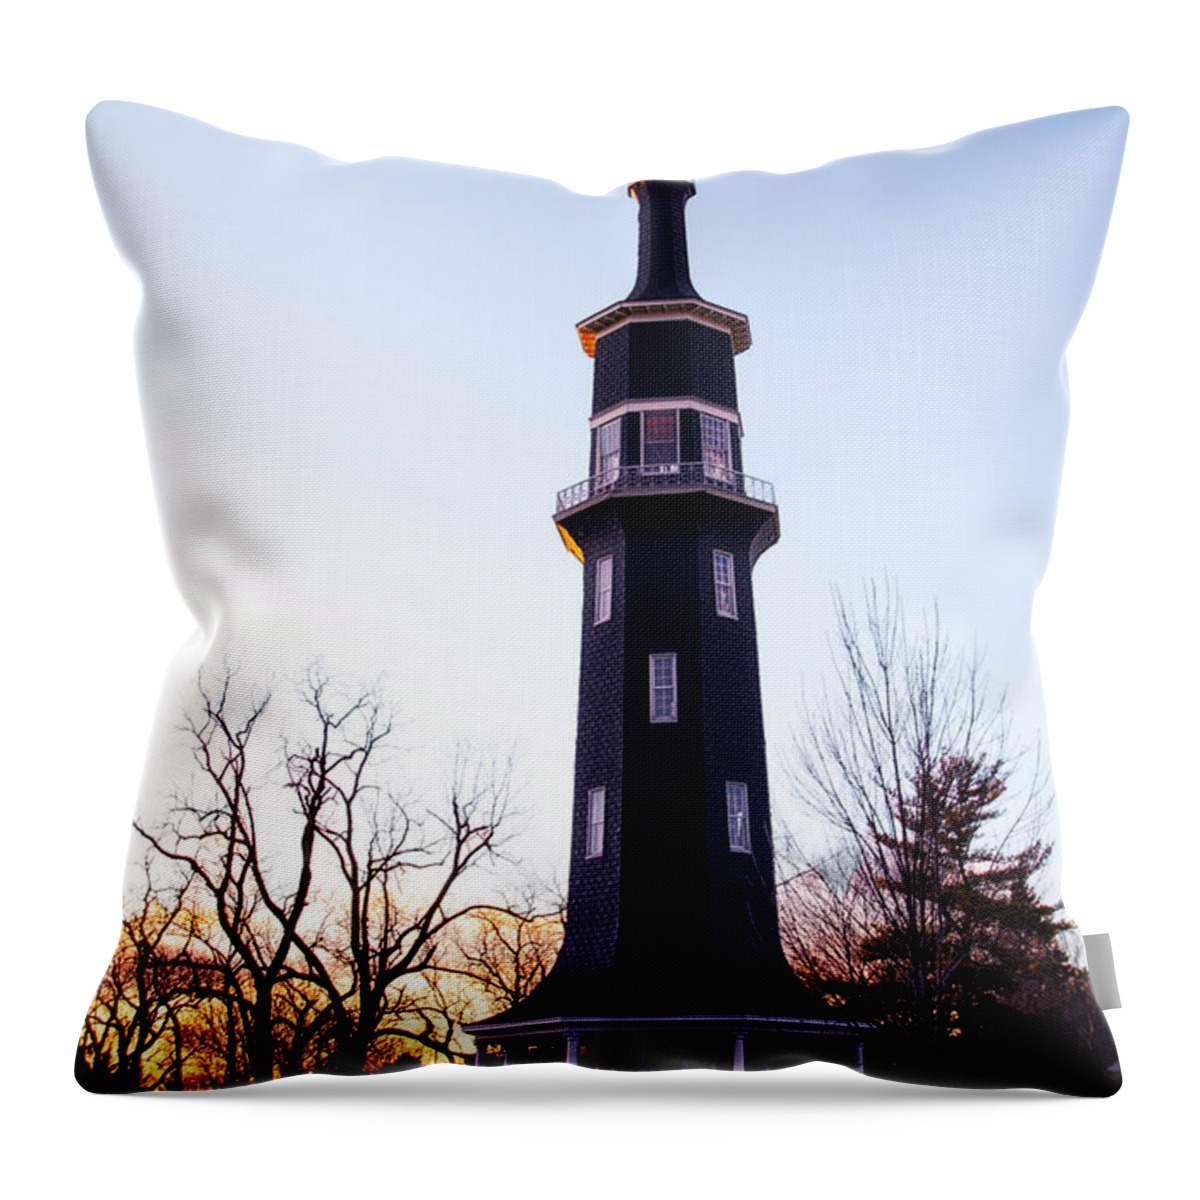 Windmill Throw Pillow featuring the photograph The Dwight Windmill by Thomas Woolworth